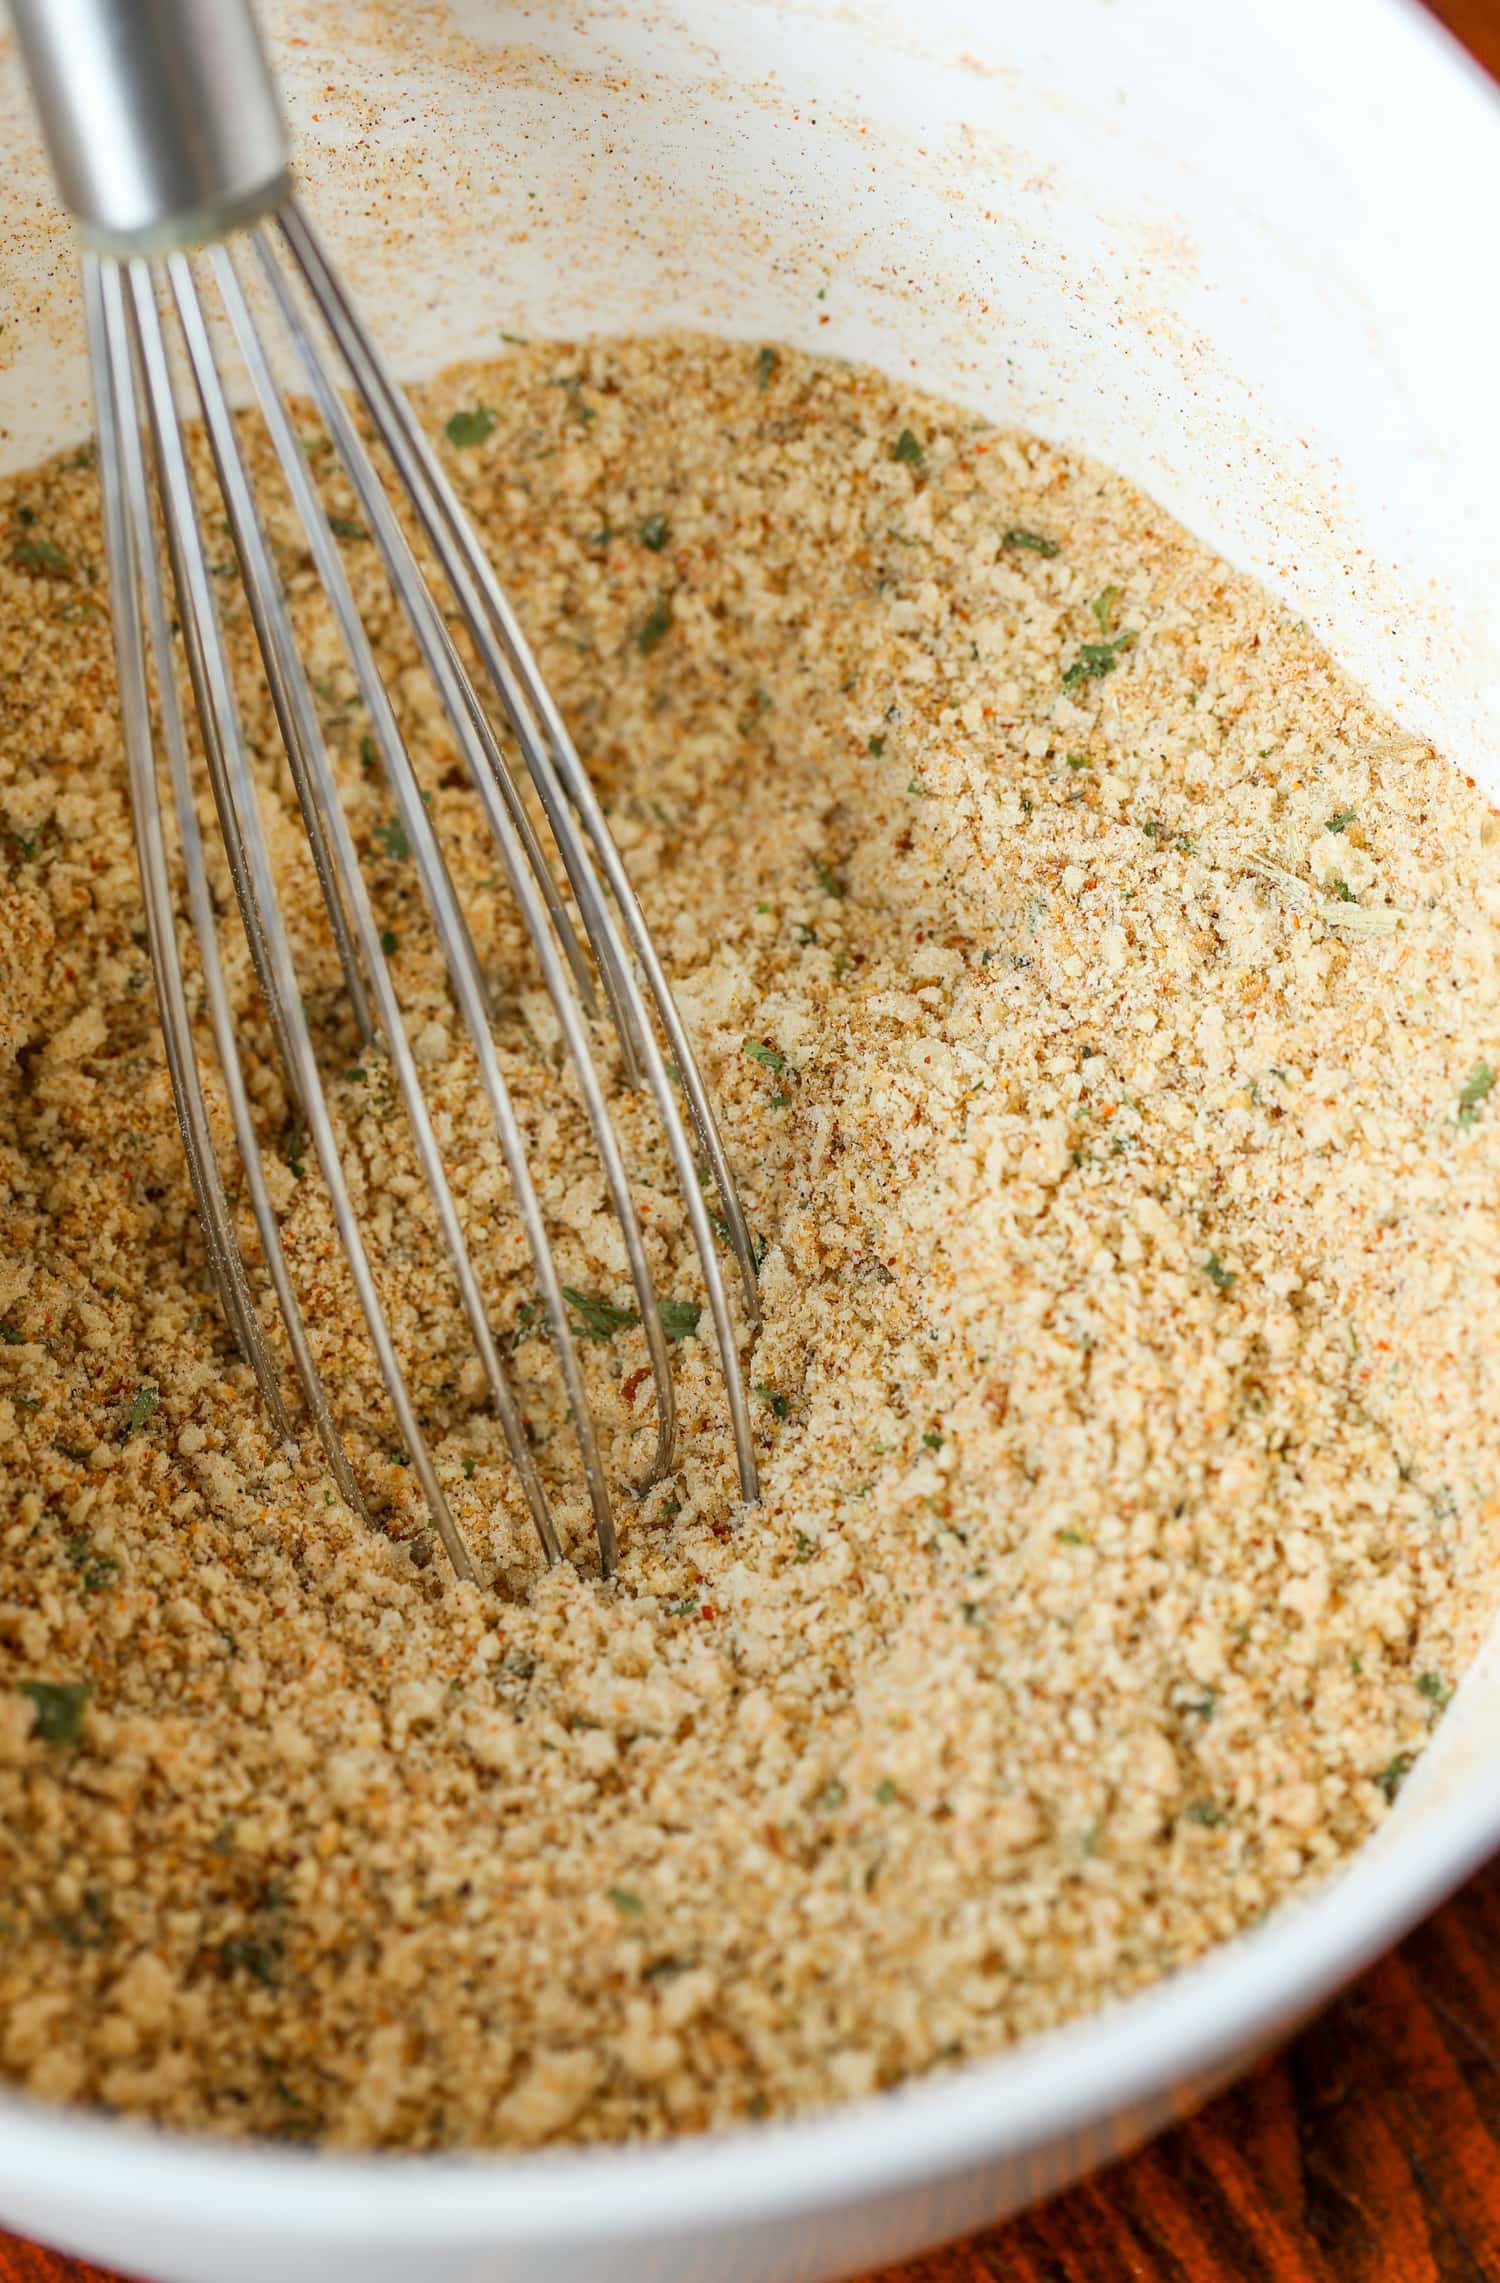 Whisking together the ingredients for the spicy breadcrumb coating.